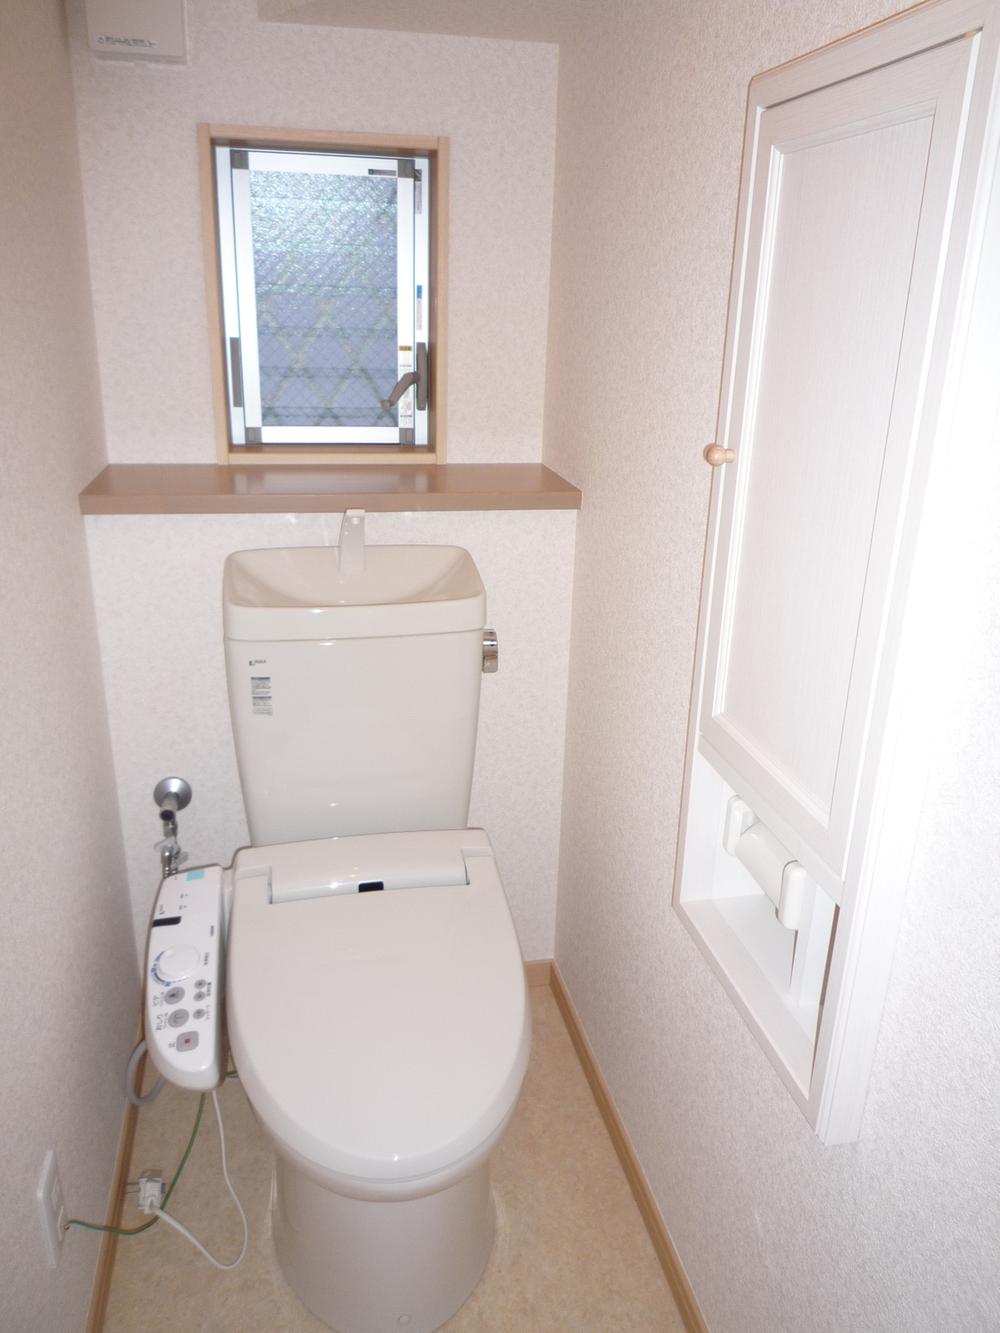 Toilet. Also housed in the horizontal